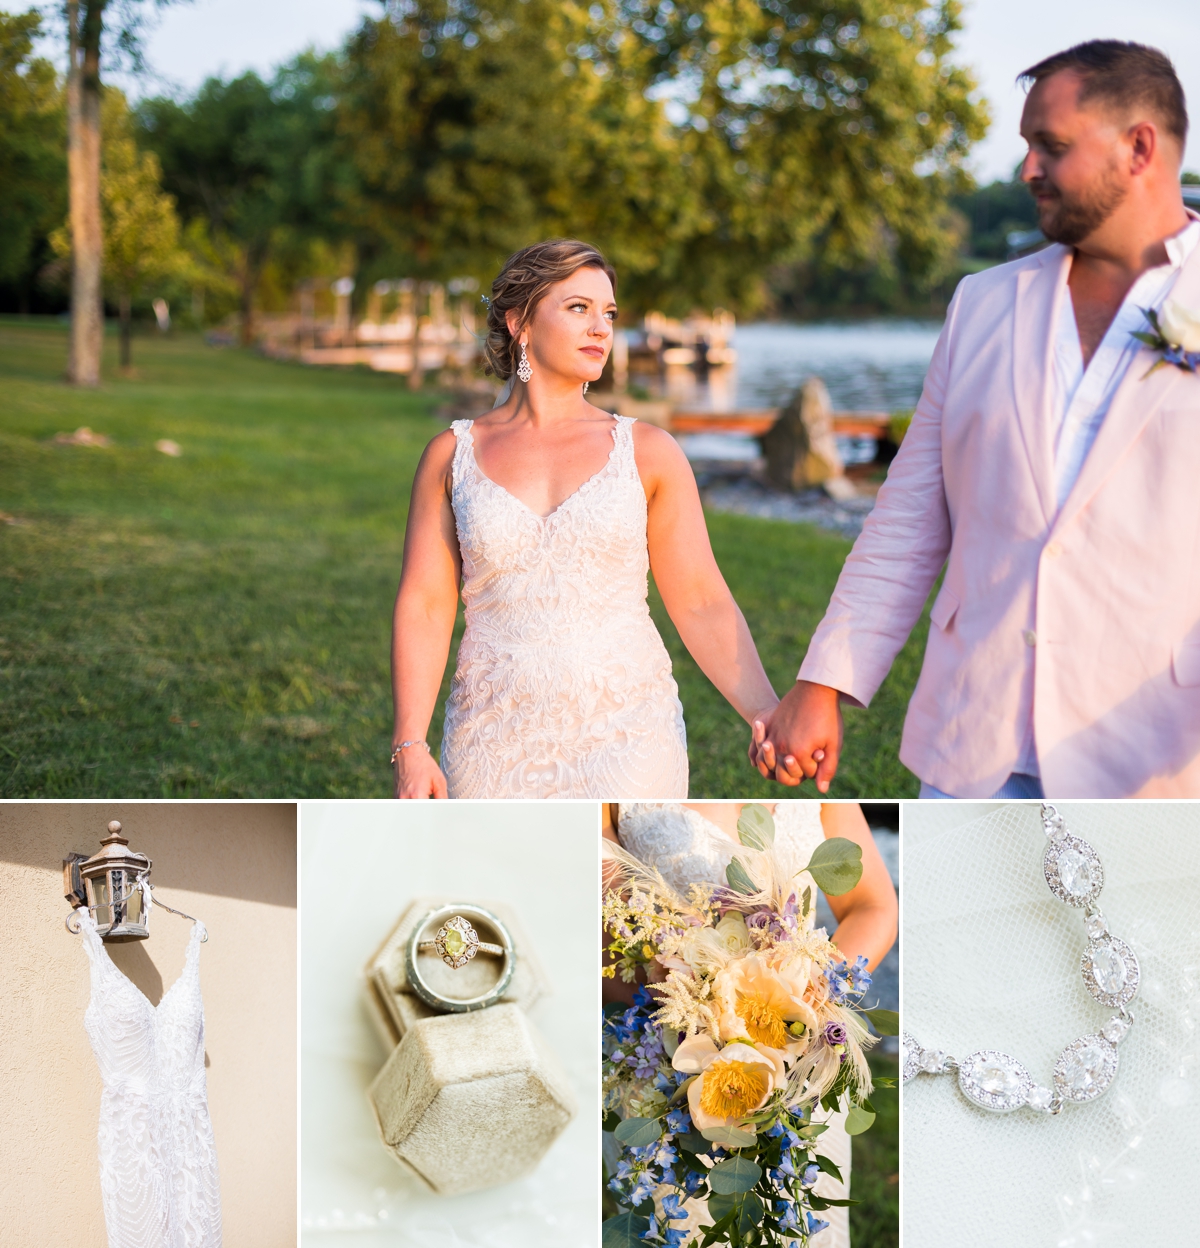 Collage of Kathryn and Eric walking together on the lake edge and detail photos from their wedding in Nashville.